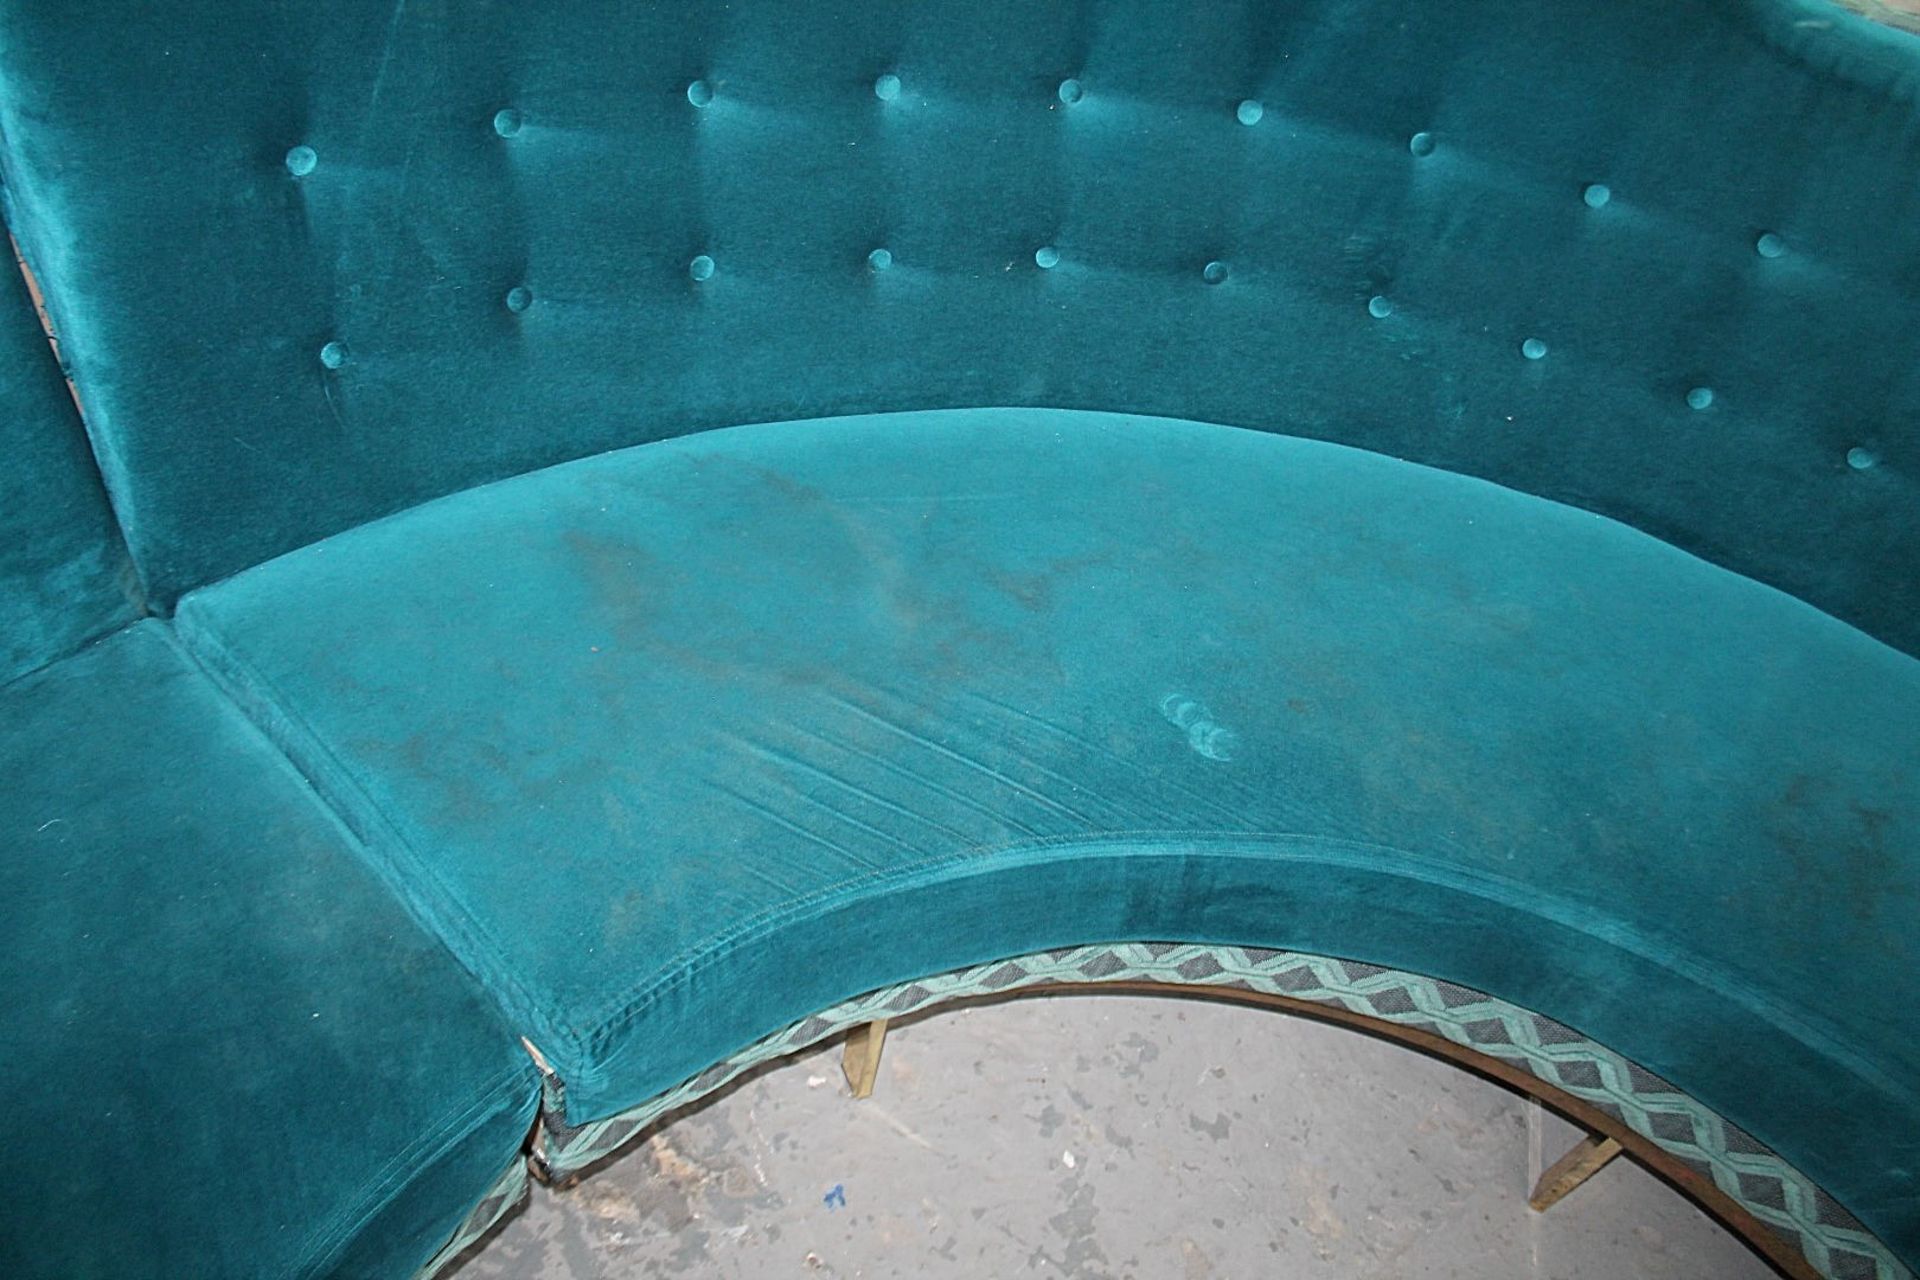 1 x Bespoke Commercial Curved C-Shaped Booth Seating Upholstered In Premium Teal Coloured Fabrics - - Image 7 of 17